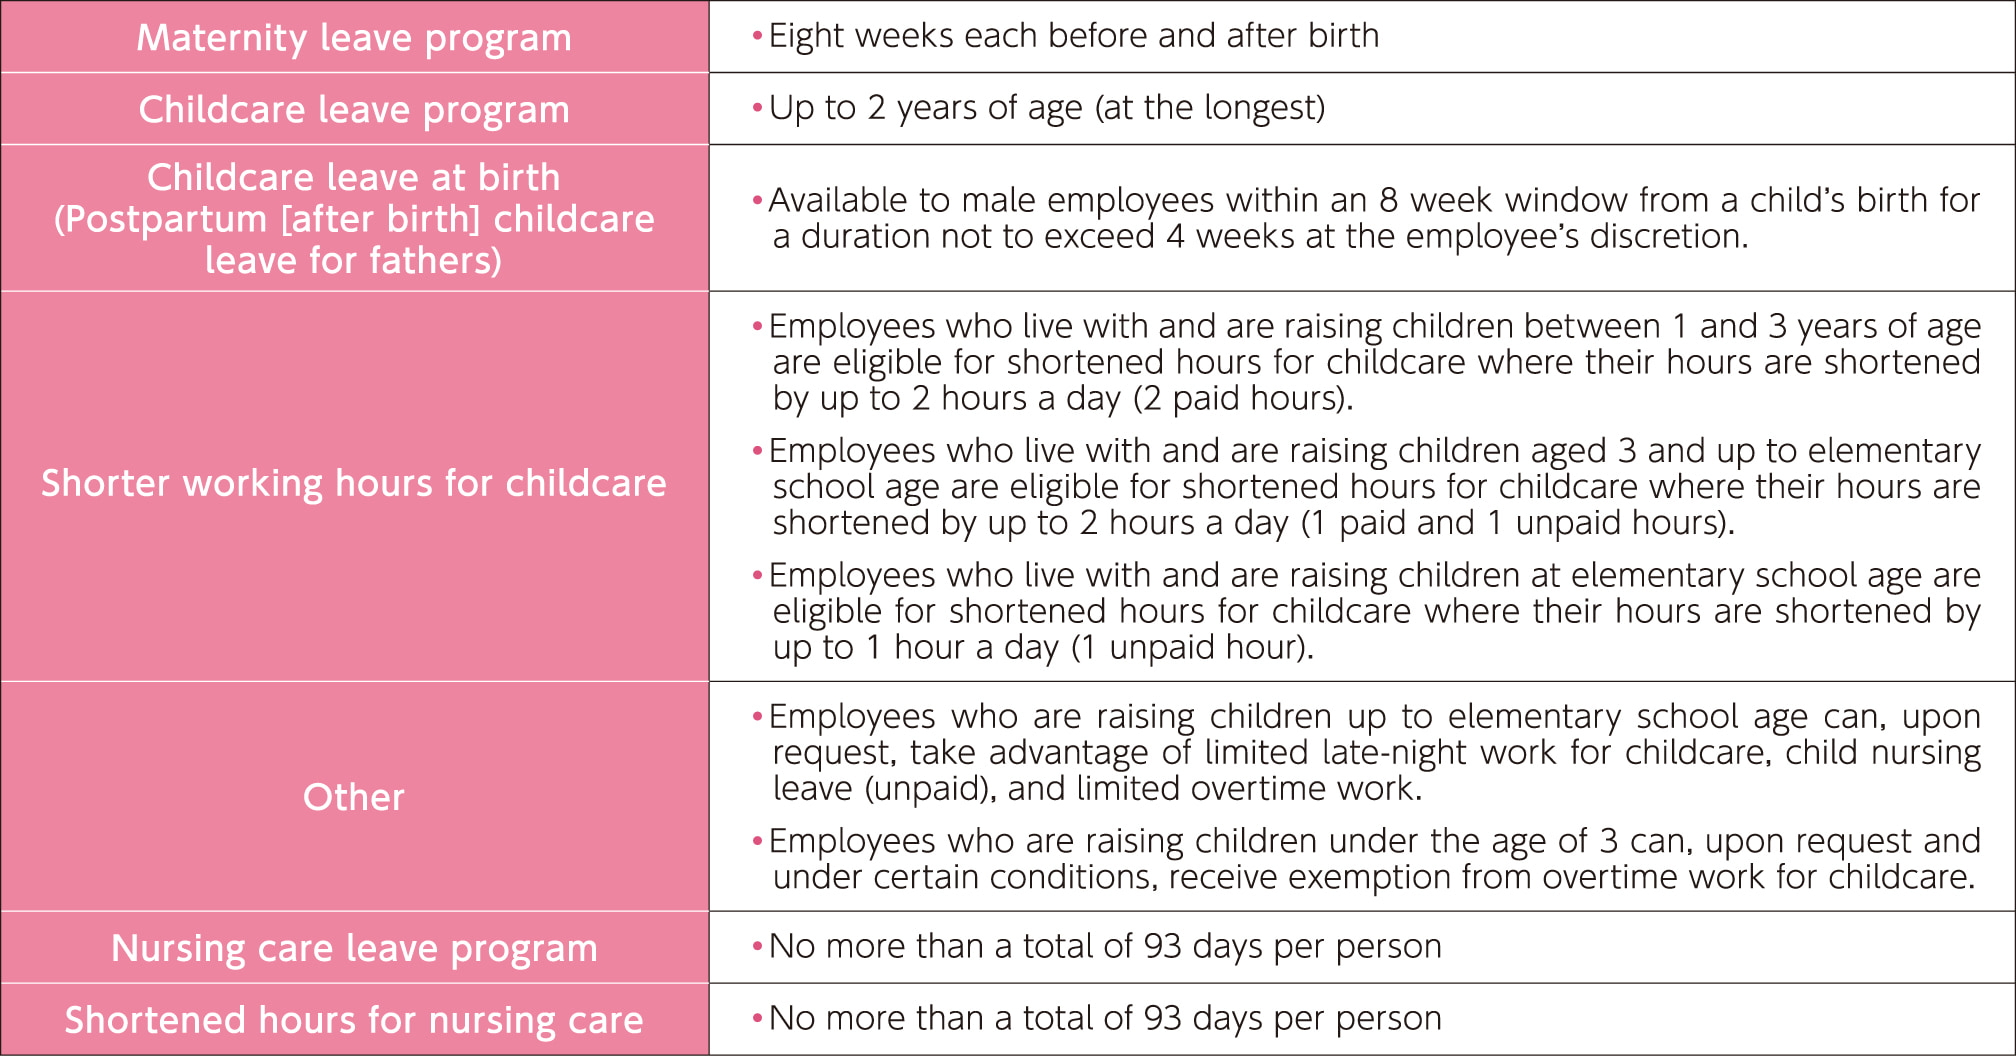 Overview of maternity leave, childcare leave, and nursing care leave programs